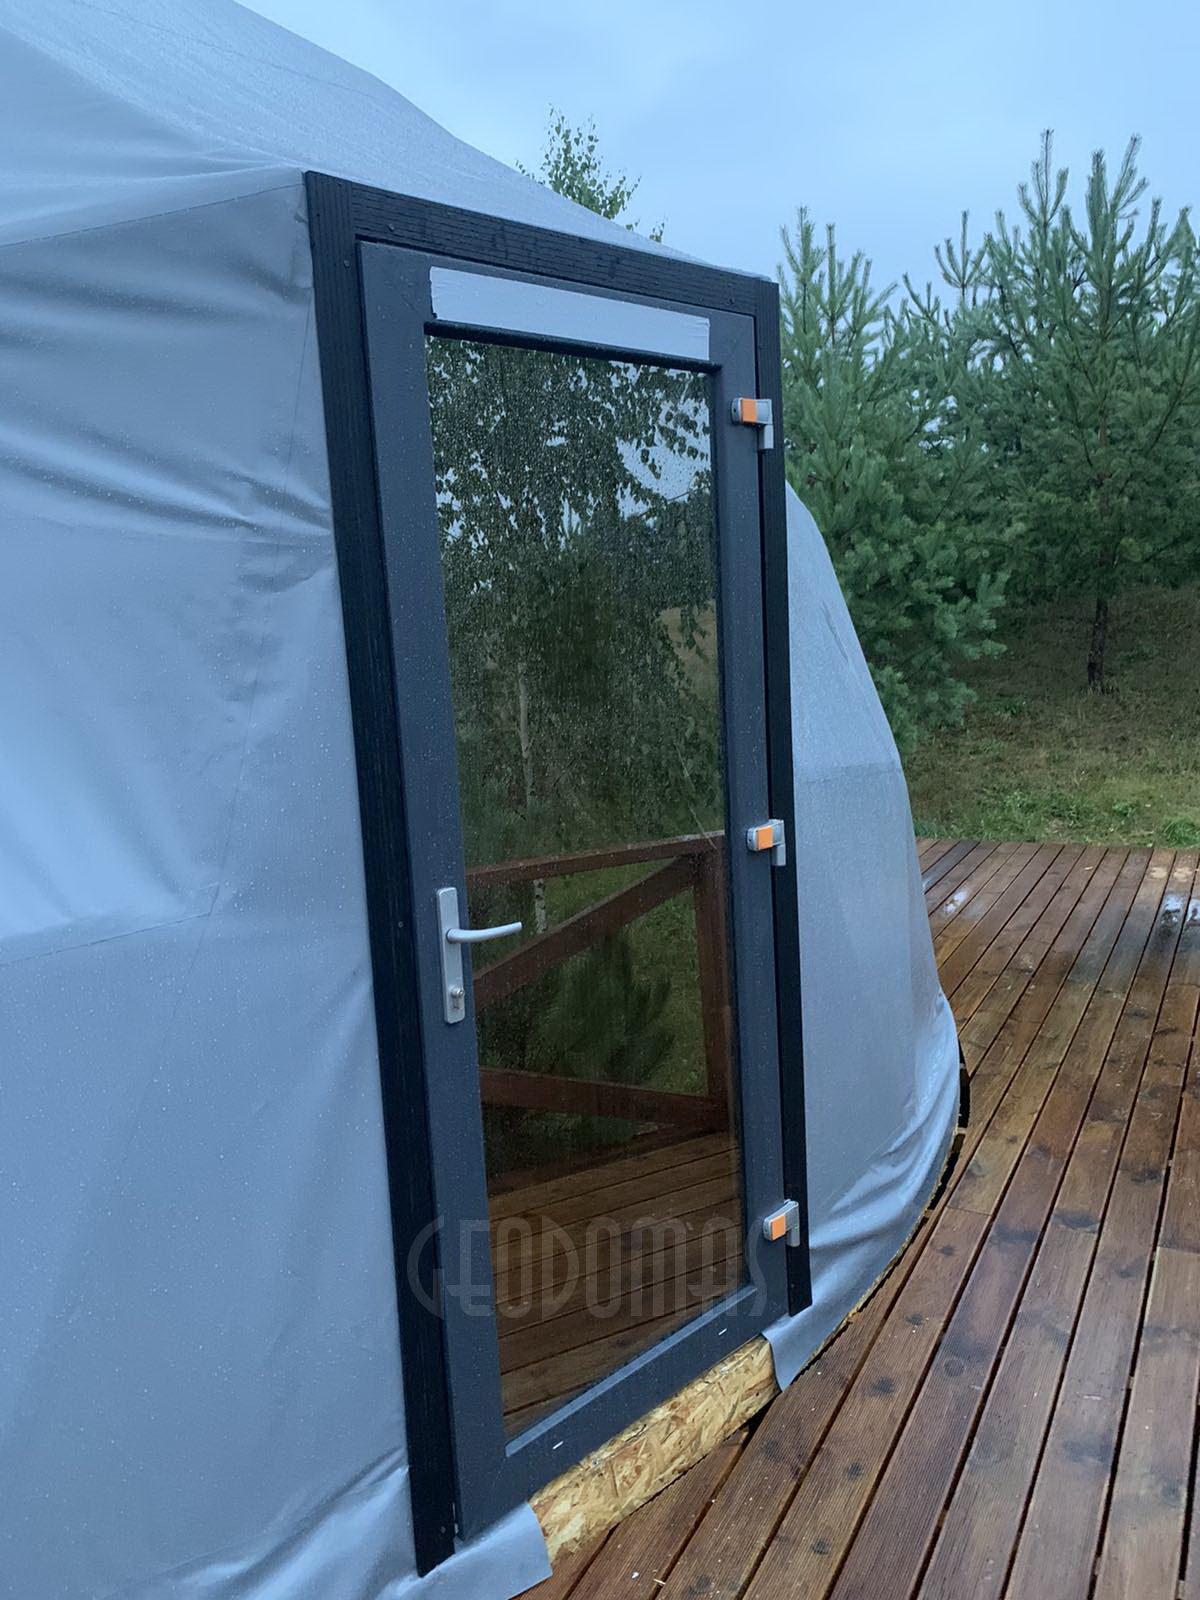 50m² Glamping Dome Ø8m | Alove Glamping Lithuania